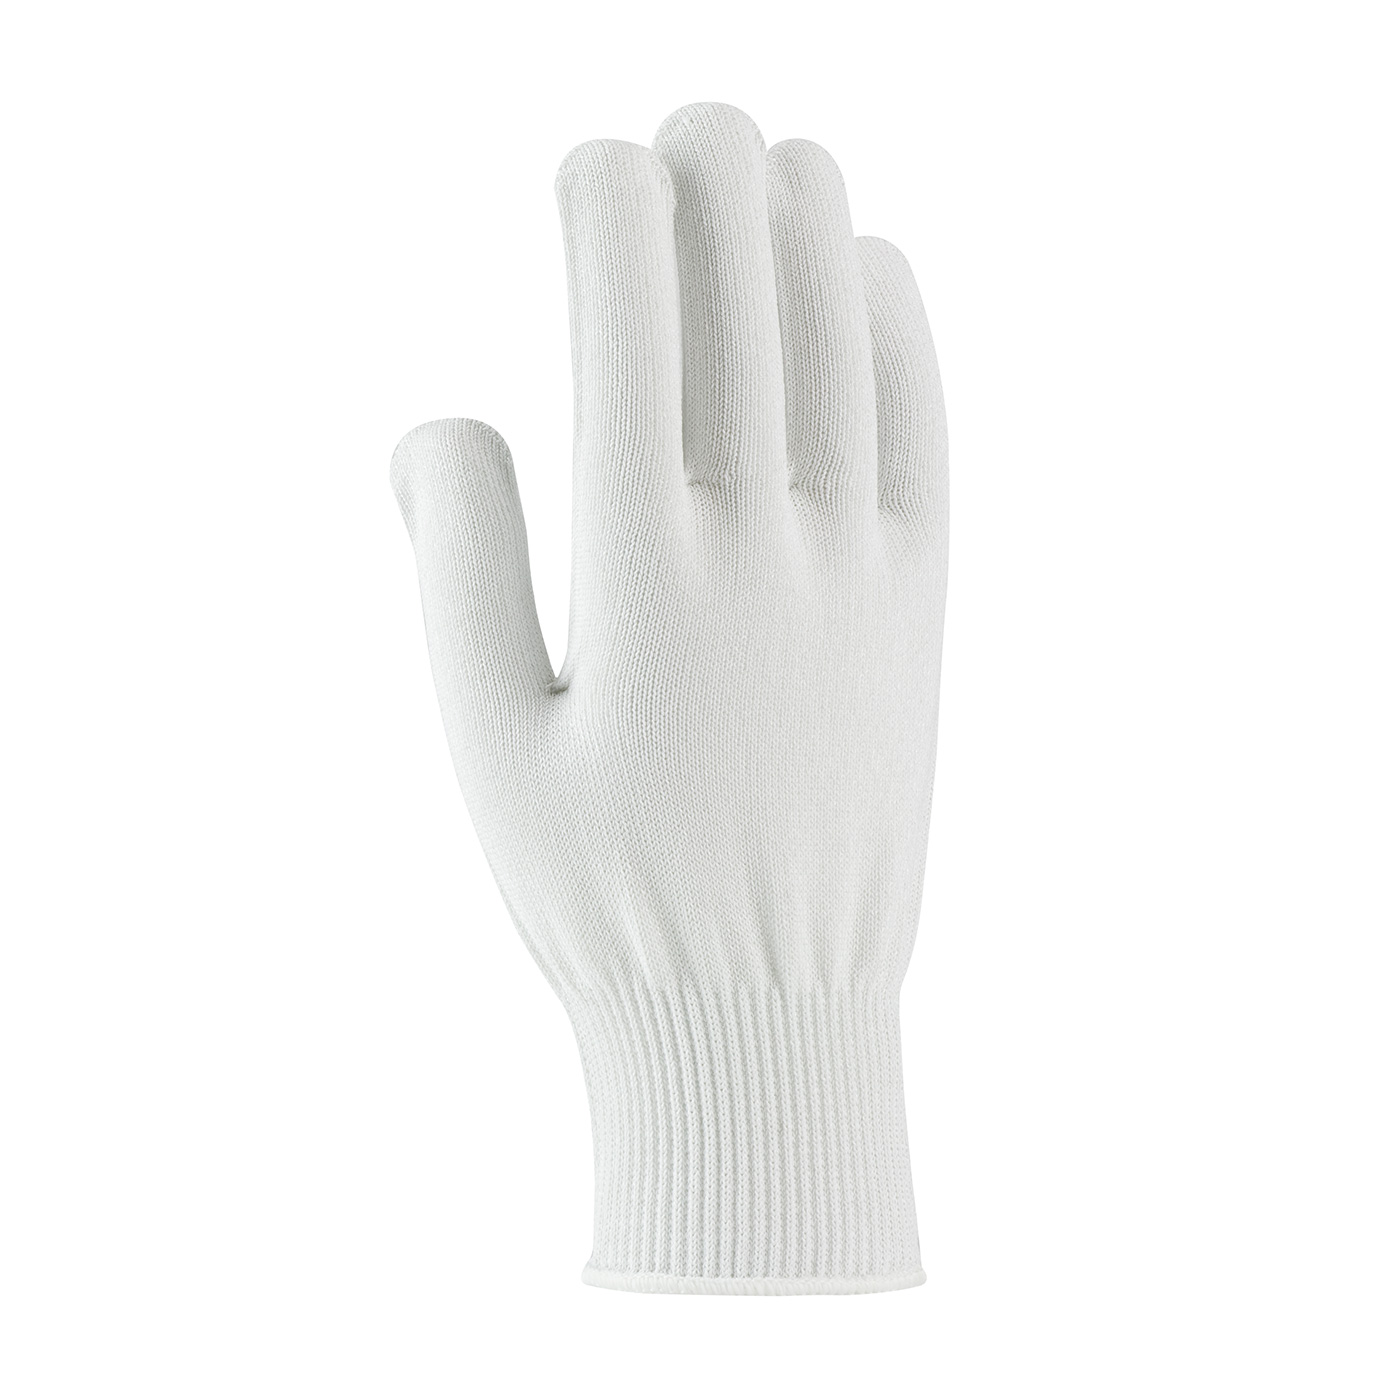 22-760 PIP® white Claw Cover® Seamless Knit Dyneema® Blended Antimicrobial Glove -- Medium Weight